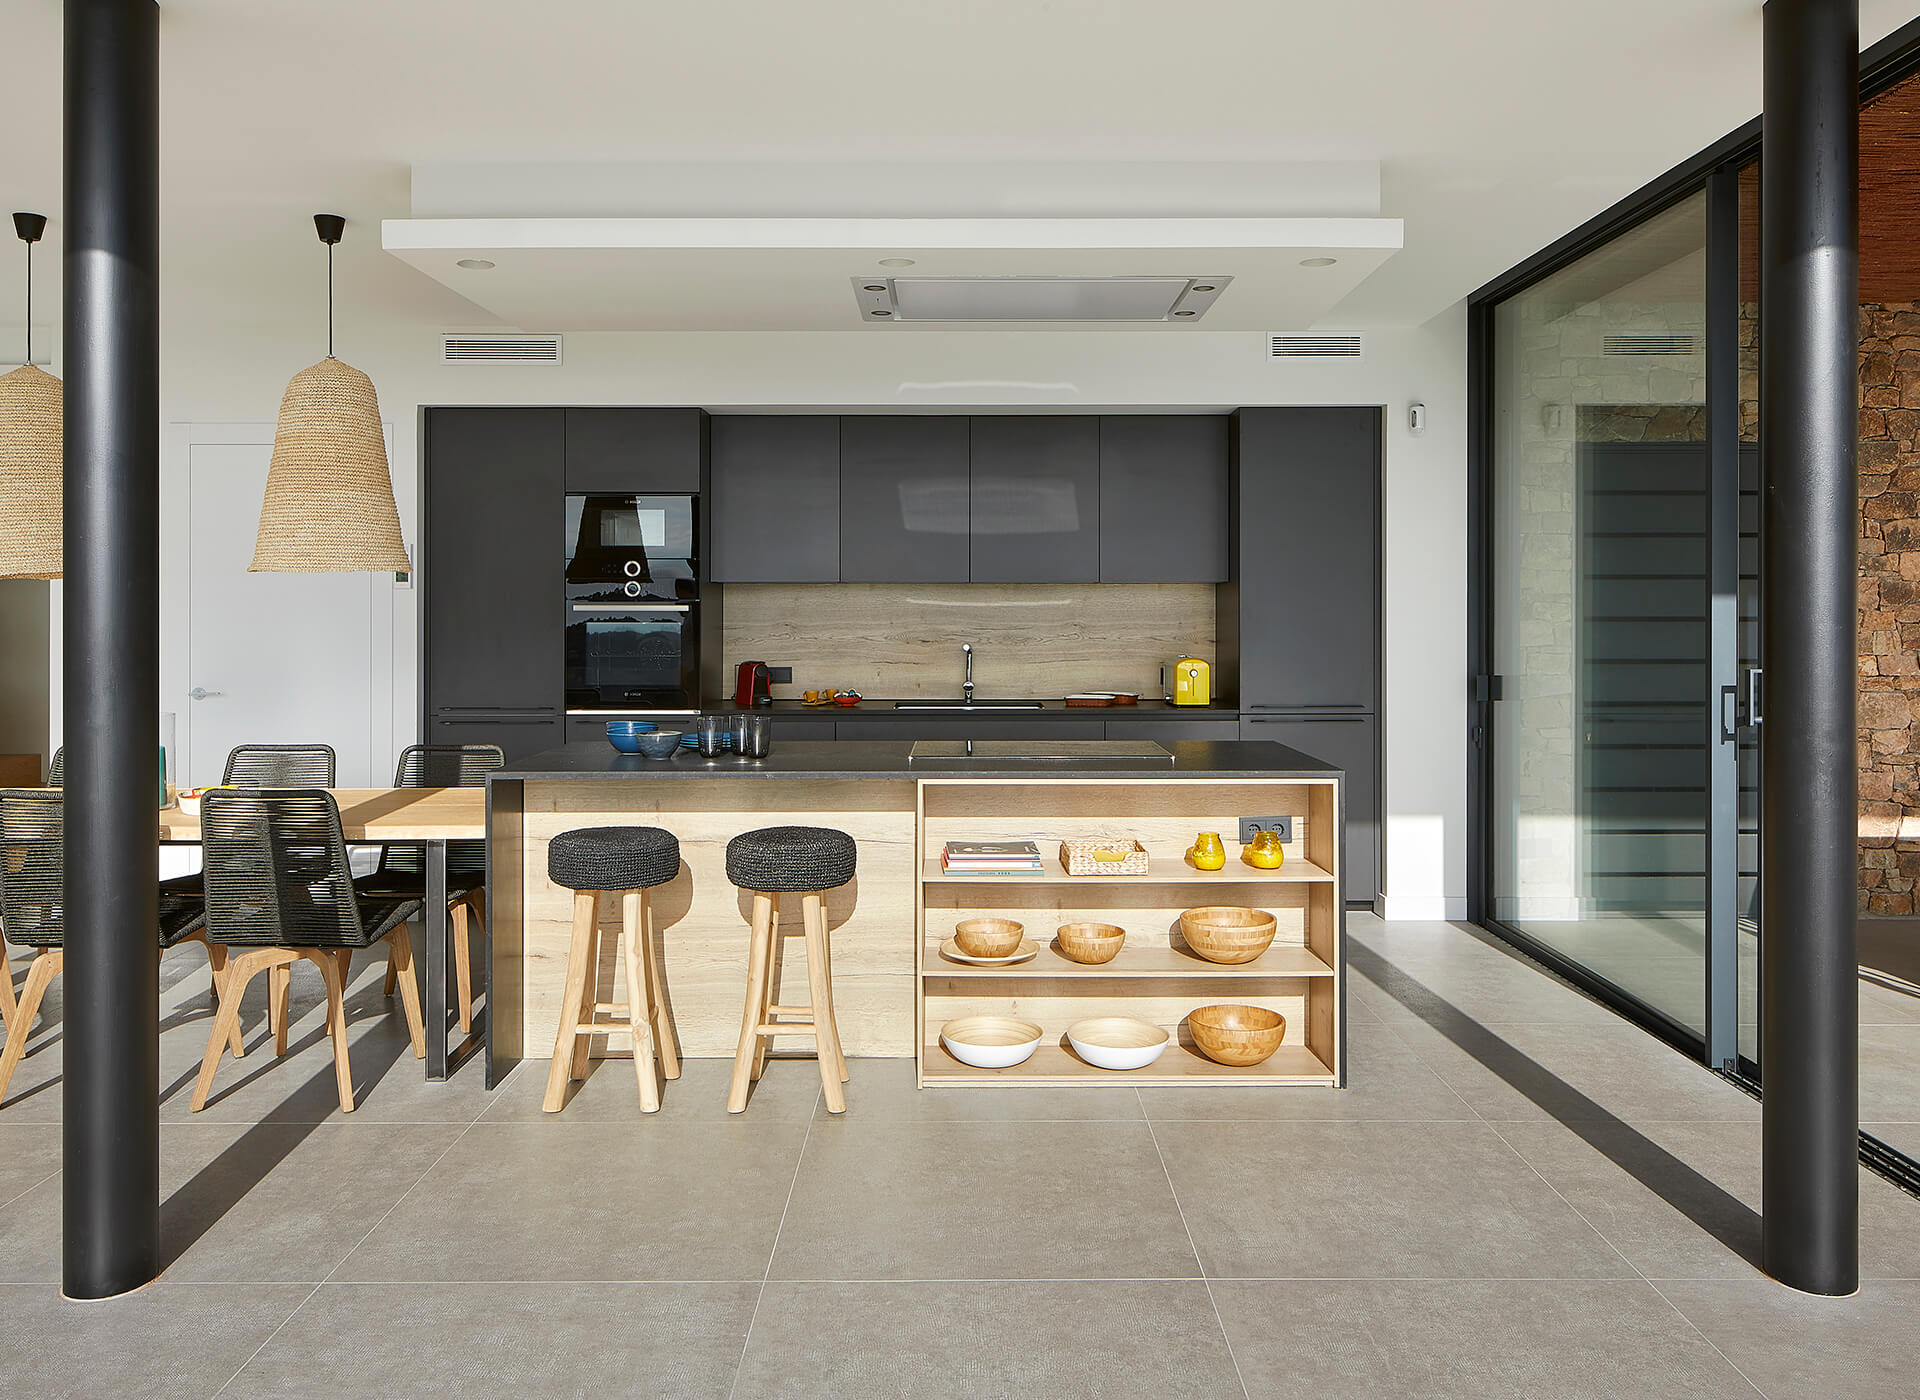 Santos kitchen finished in graphene and wood